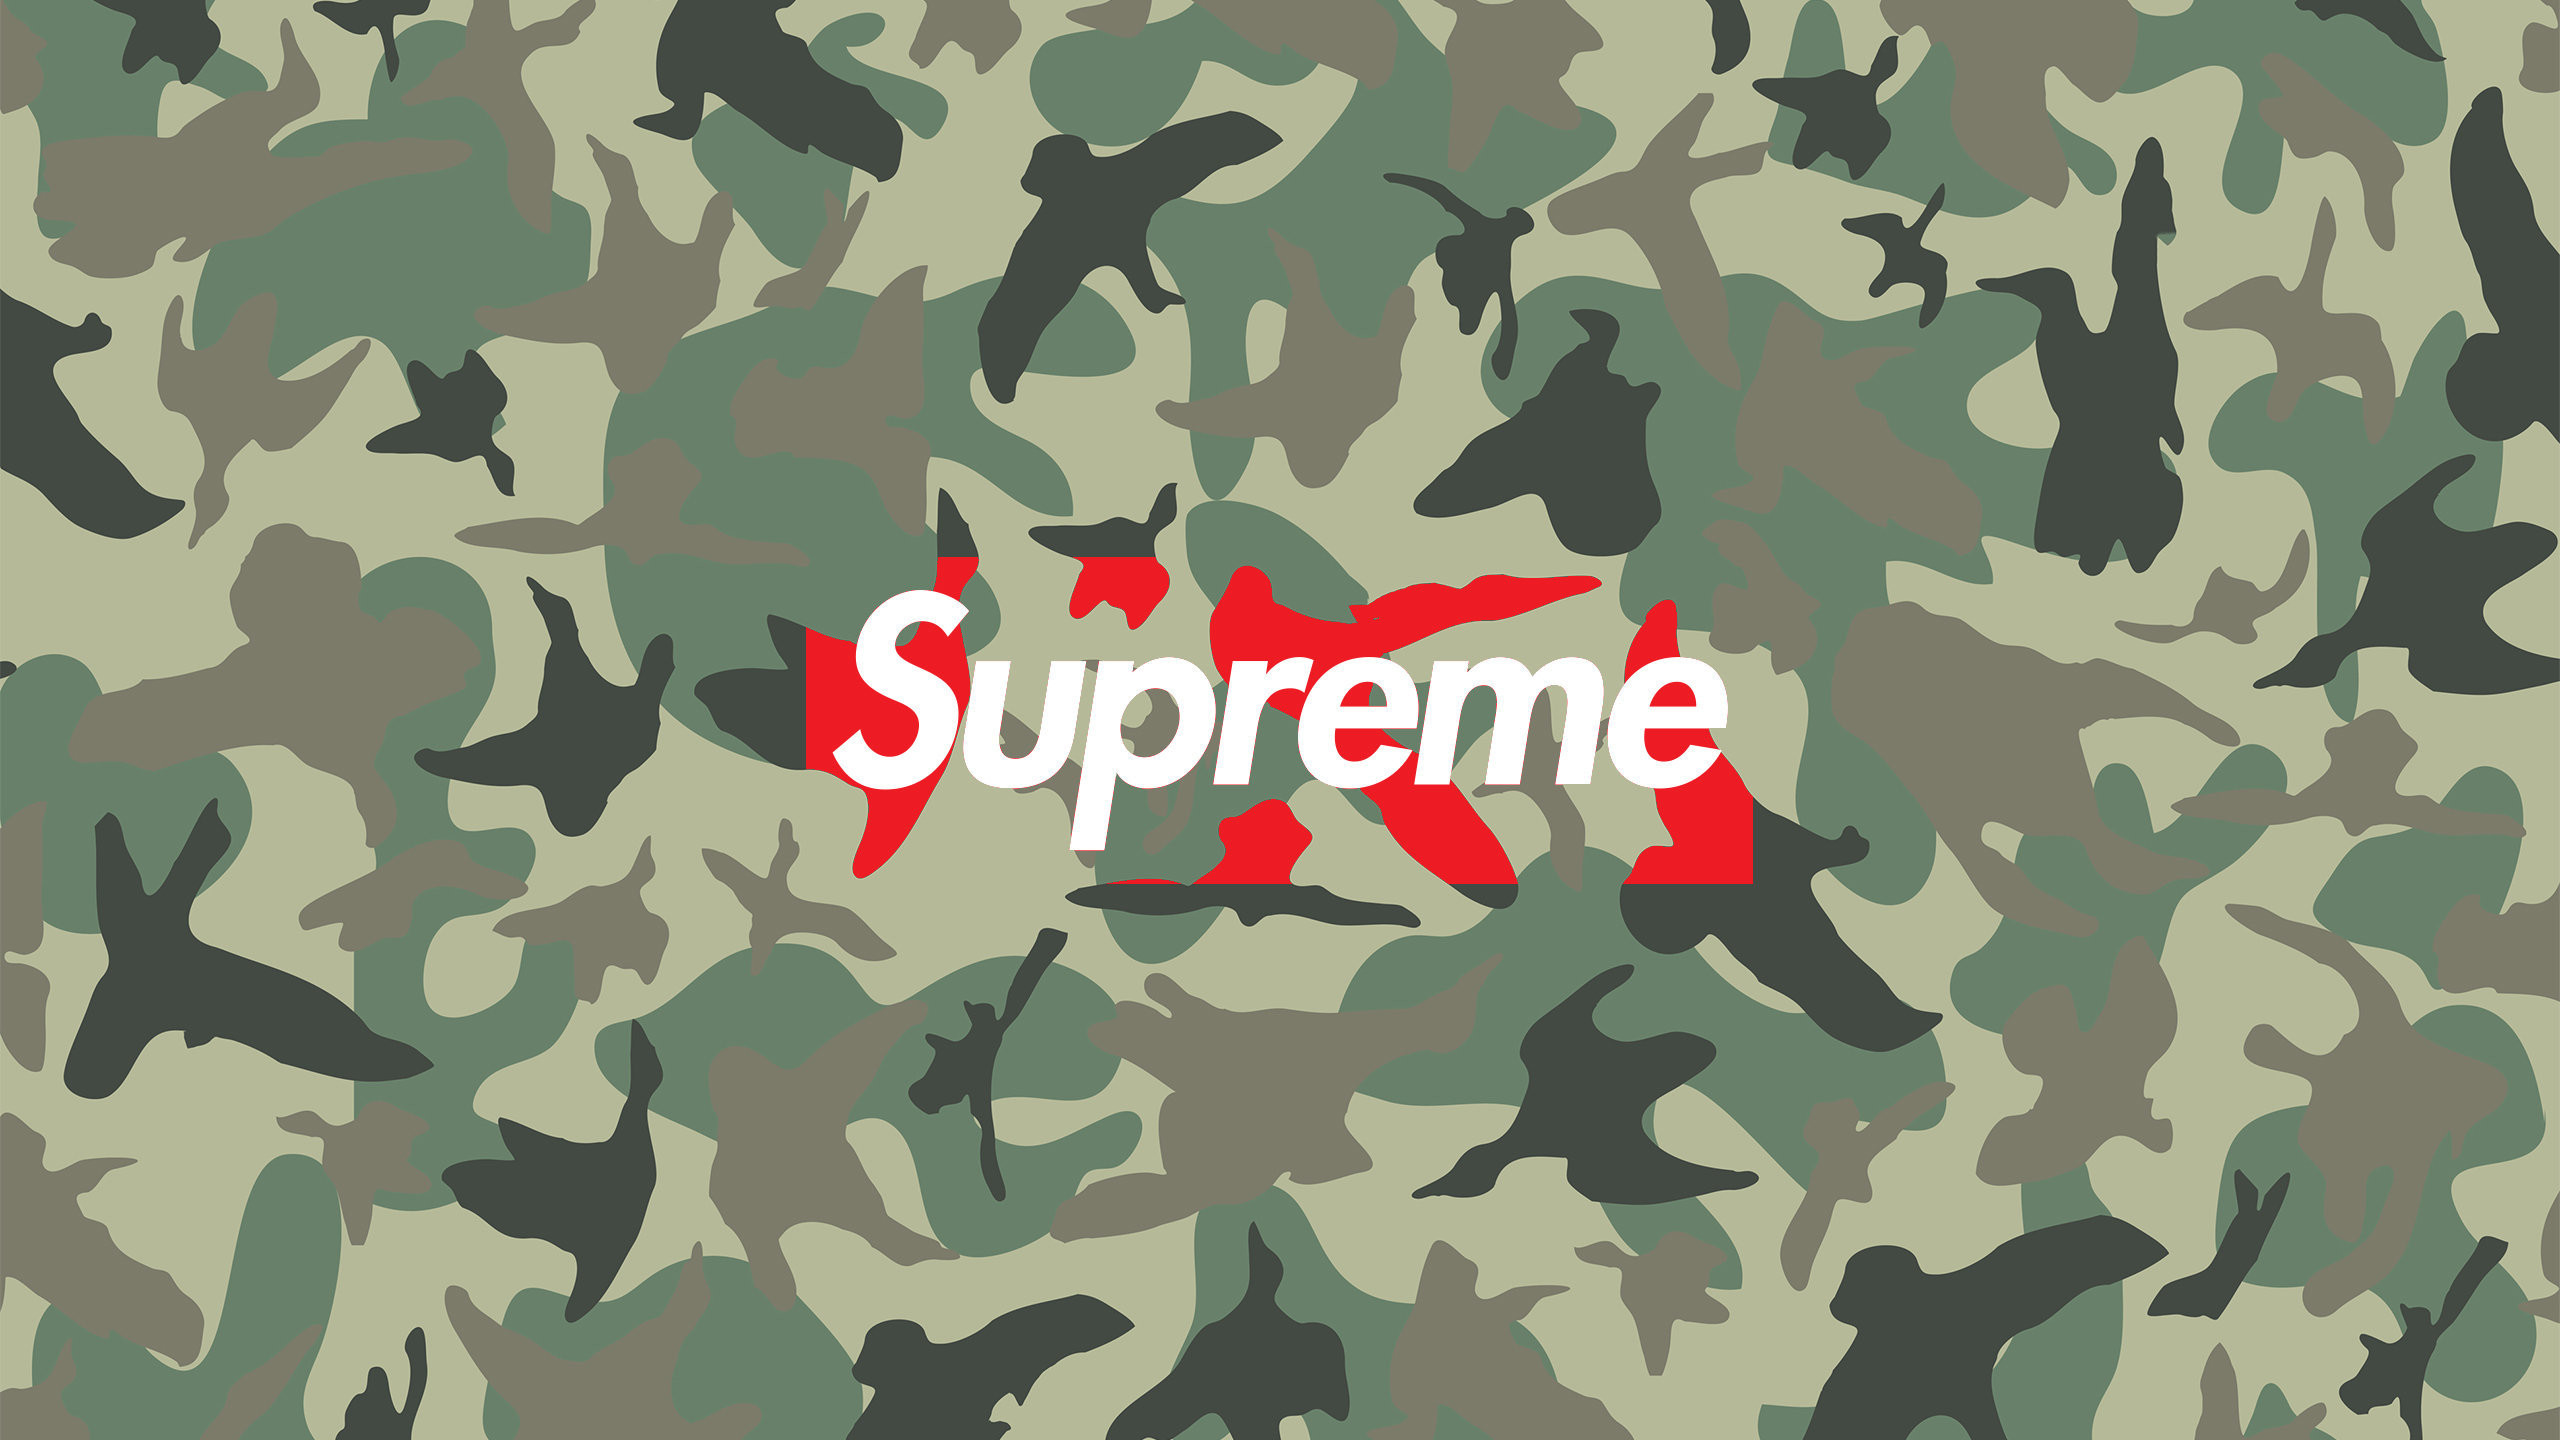 Download the Supreme Camo wallpaper below for your mobile device Android phones, iPhone etc.